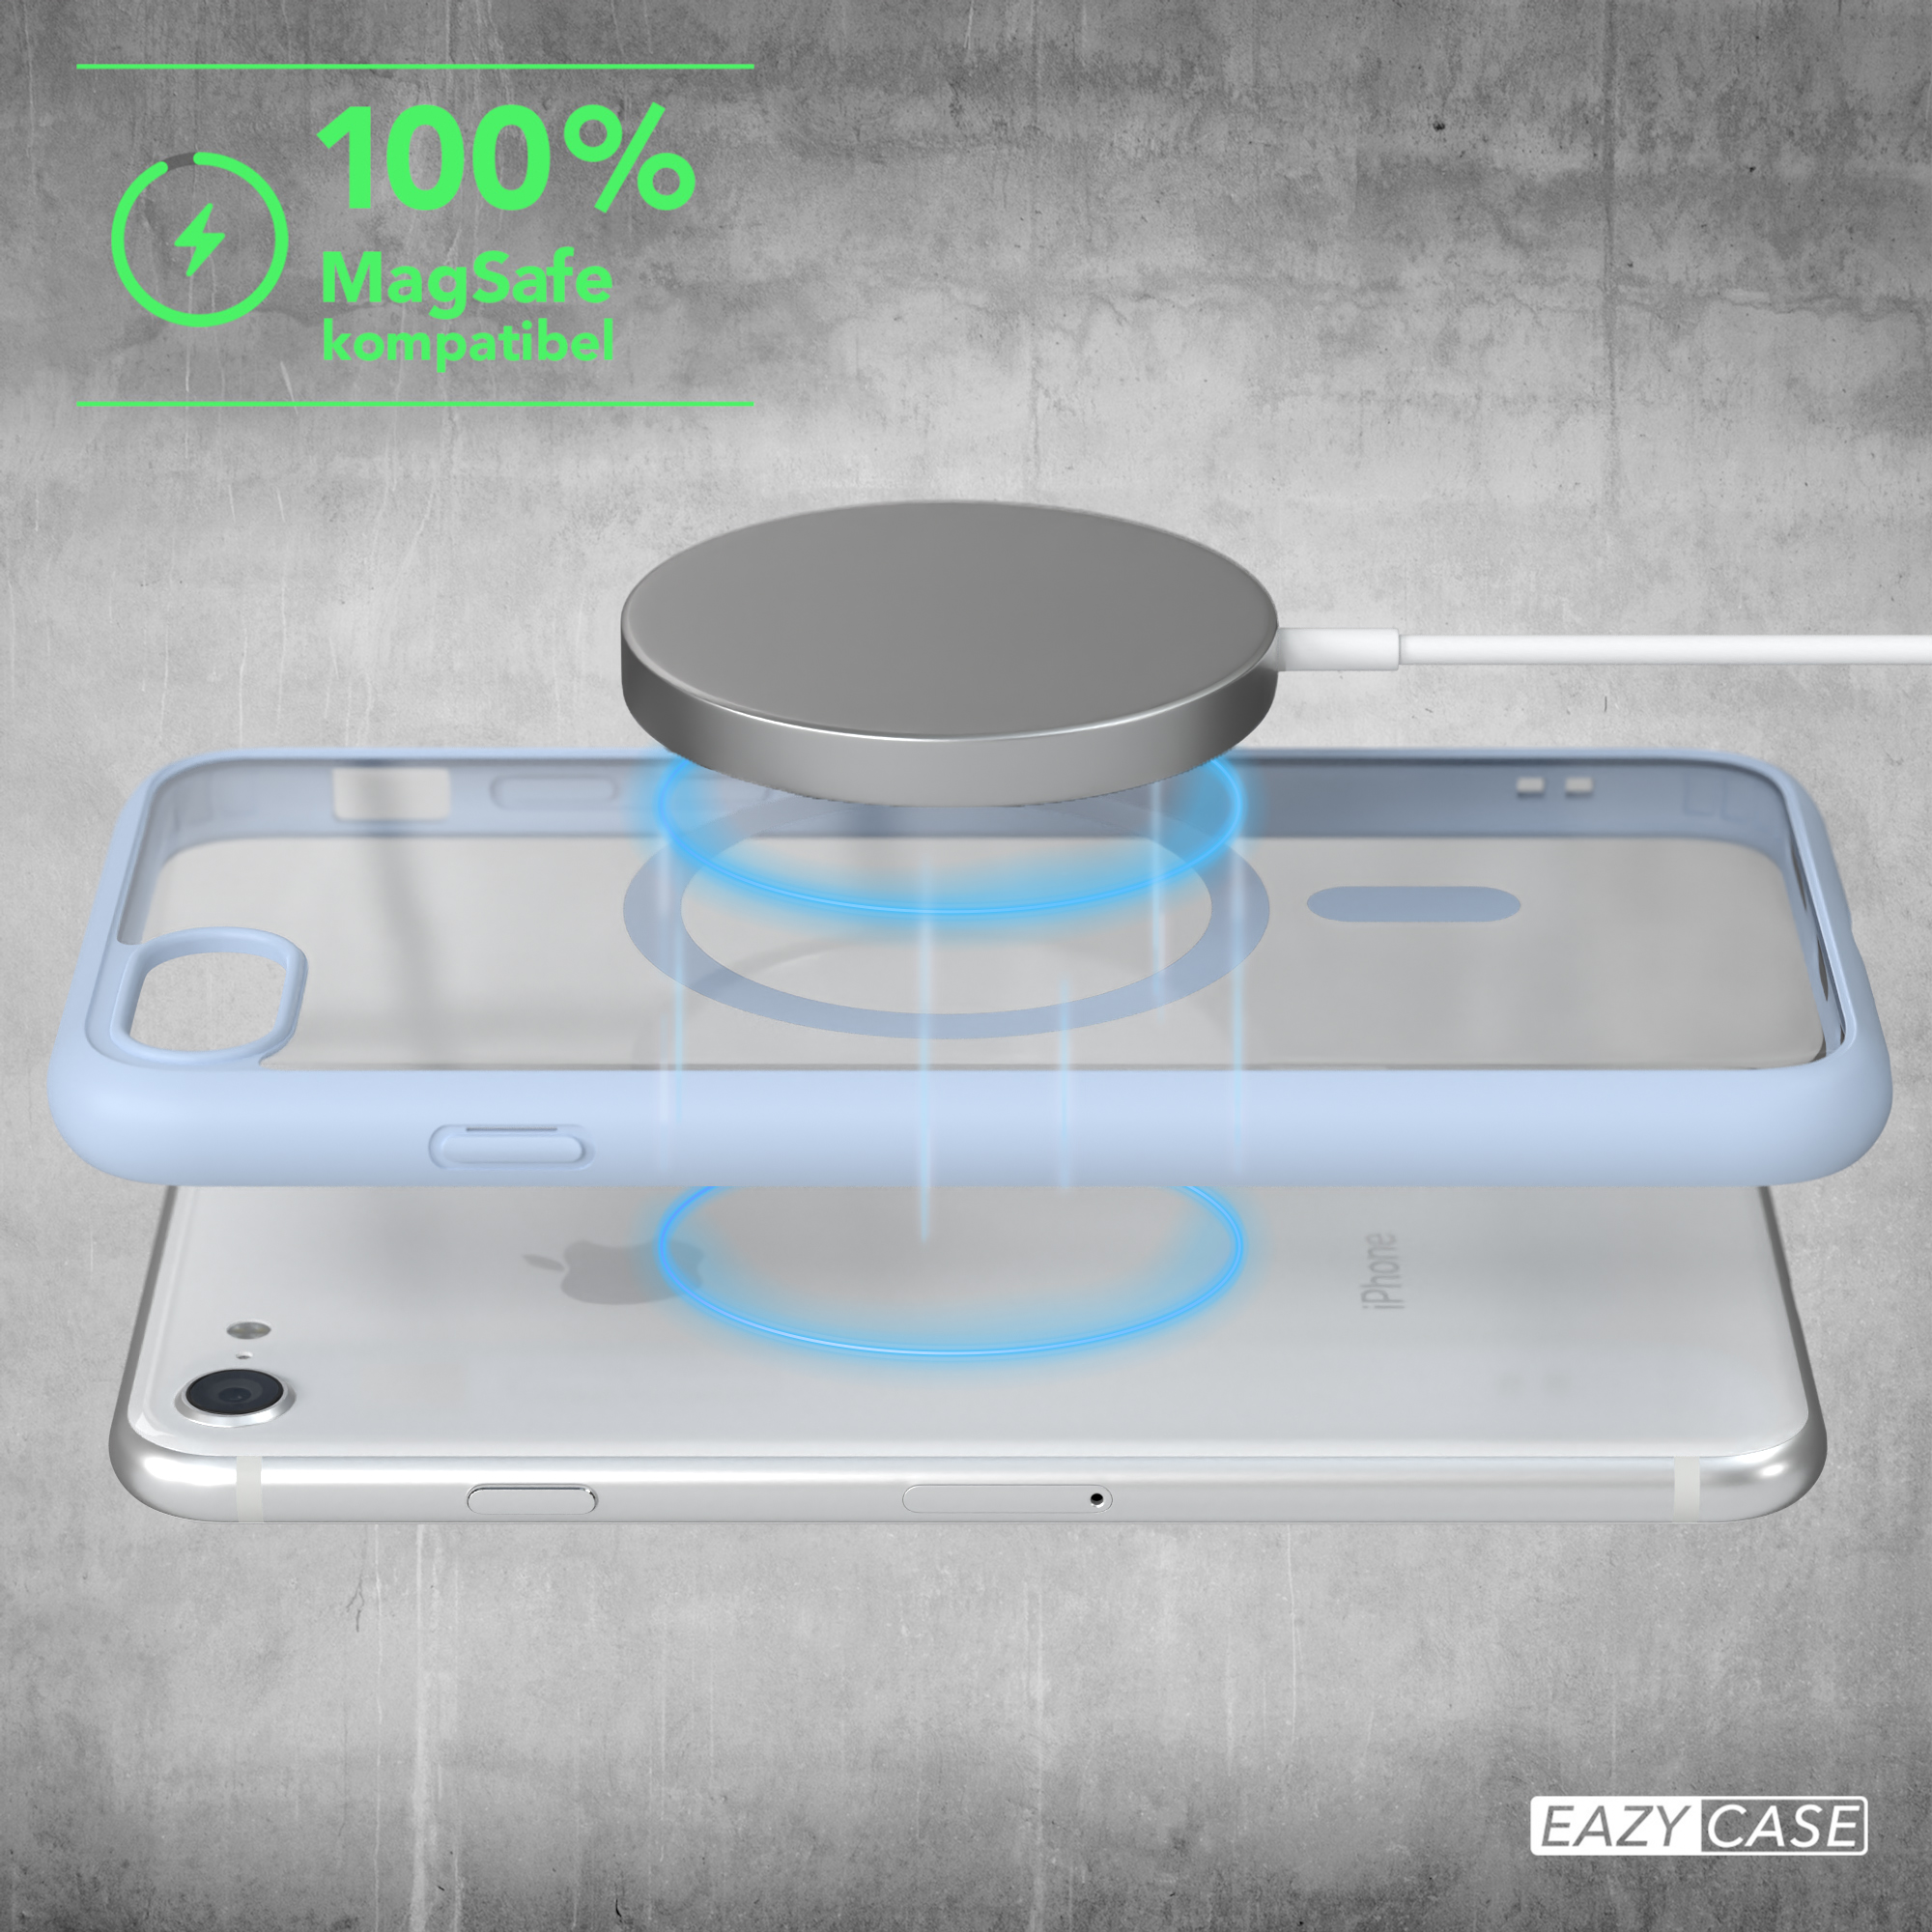 7 Clear mit iPhone MagSafe, SE 2020, SE Cover Hellblau 8, iPhone 2022 / Apple, / EAZY Bumper, CASE